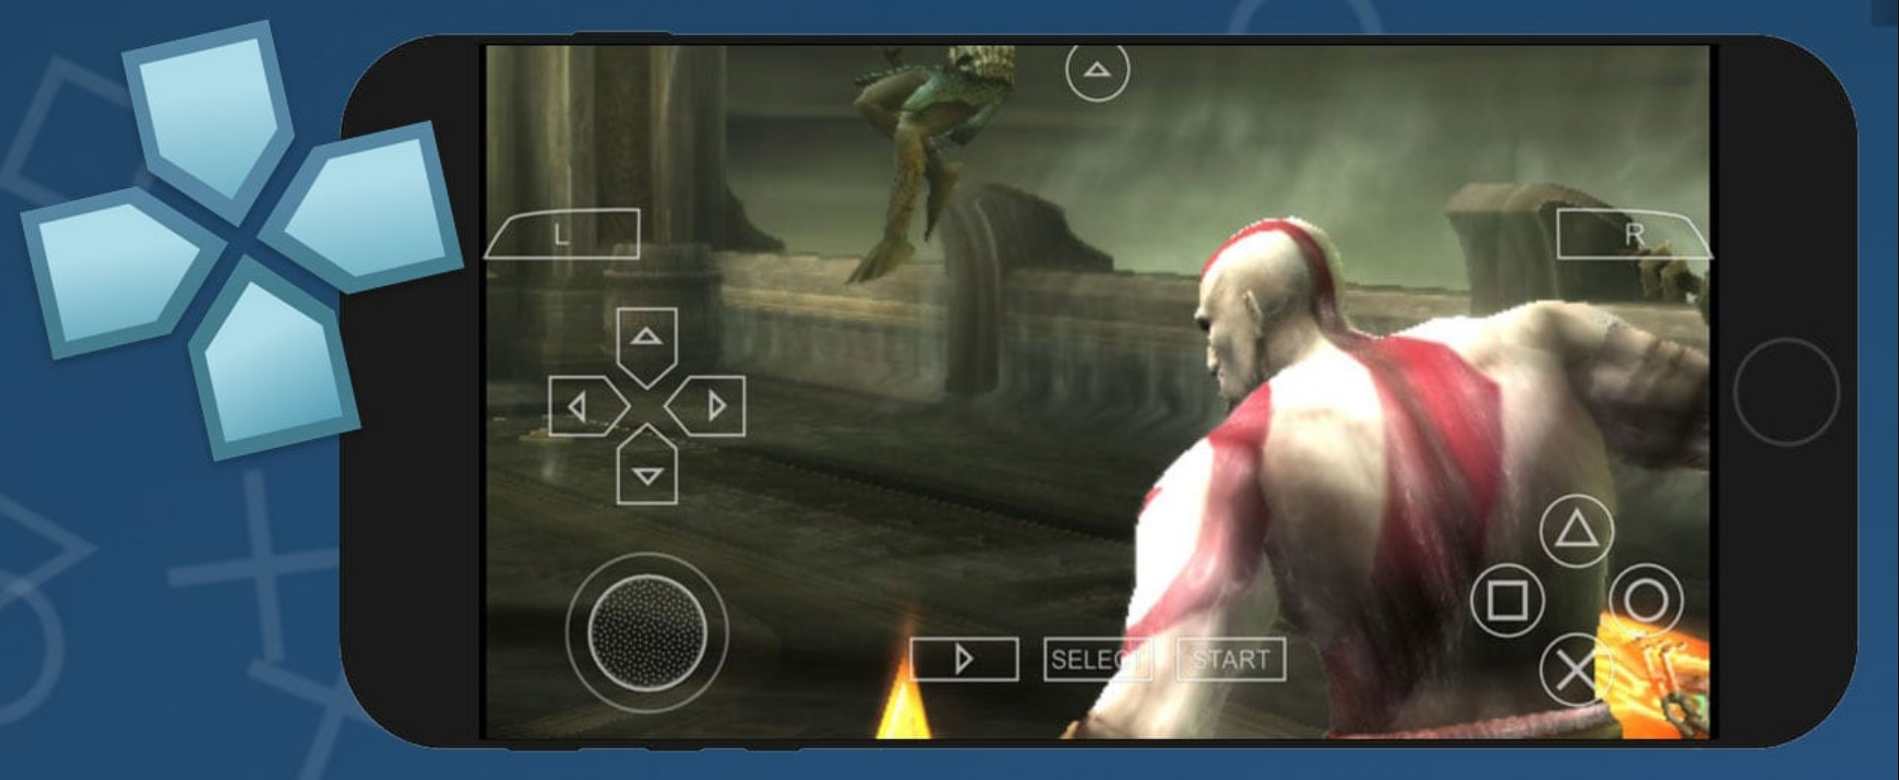 PSCP Best emulator for Gaming on iOS